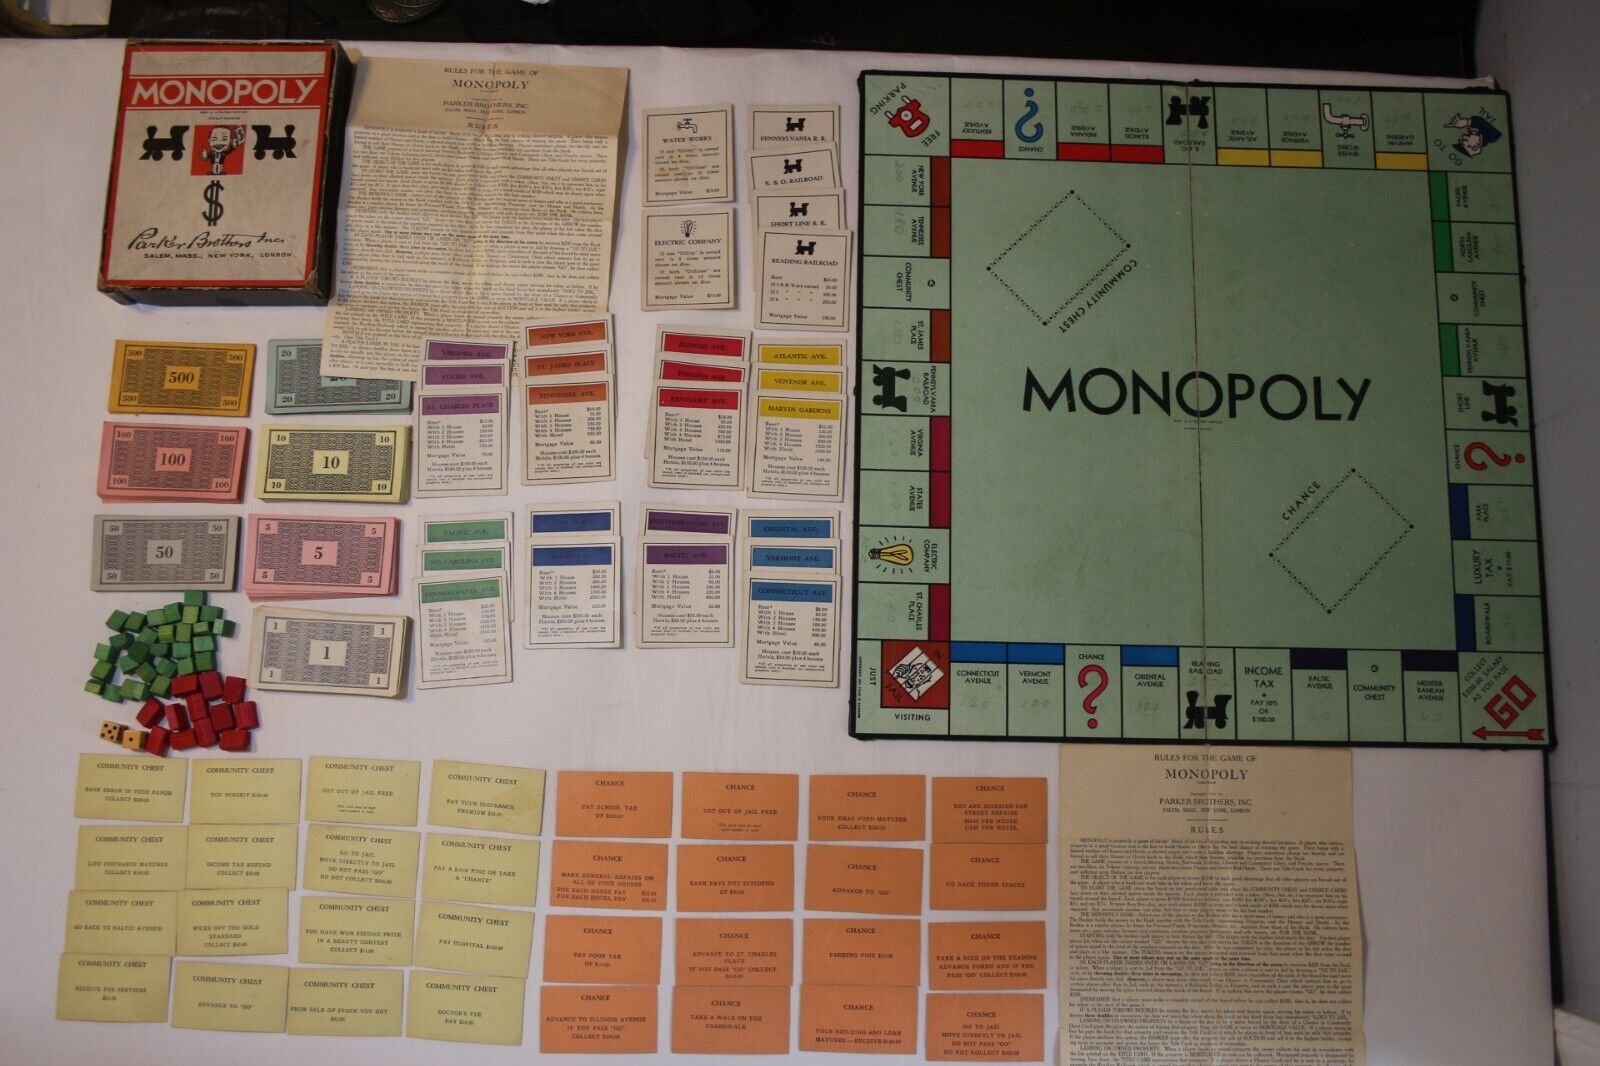 Vintage 1935 Parker Brothers Trademark/Patent Pending Edition Monopoly game